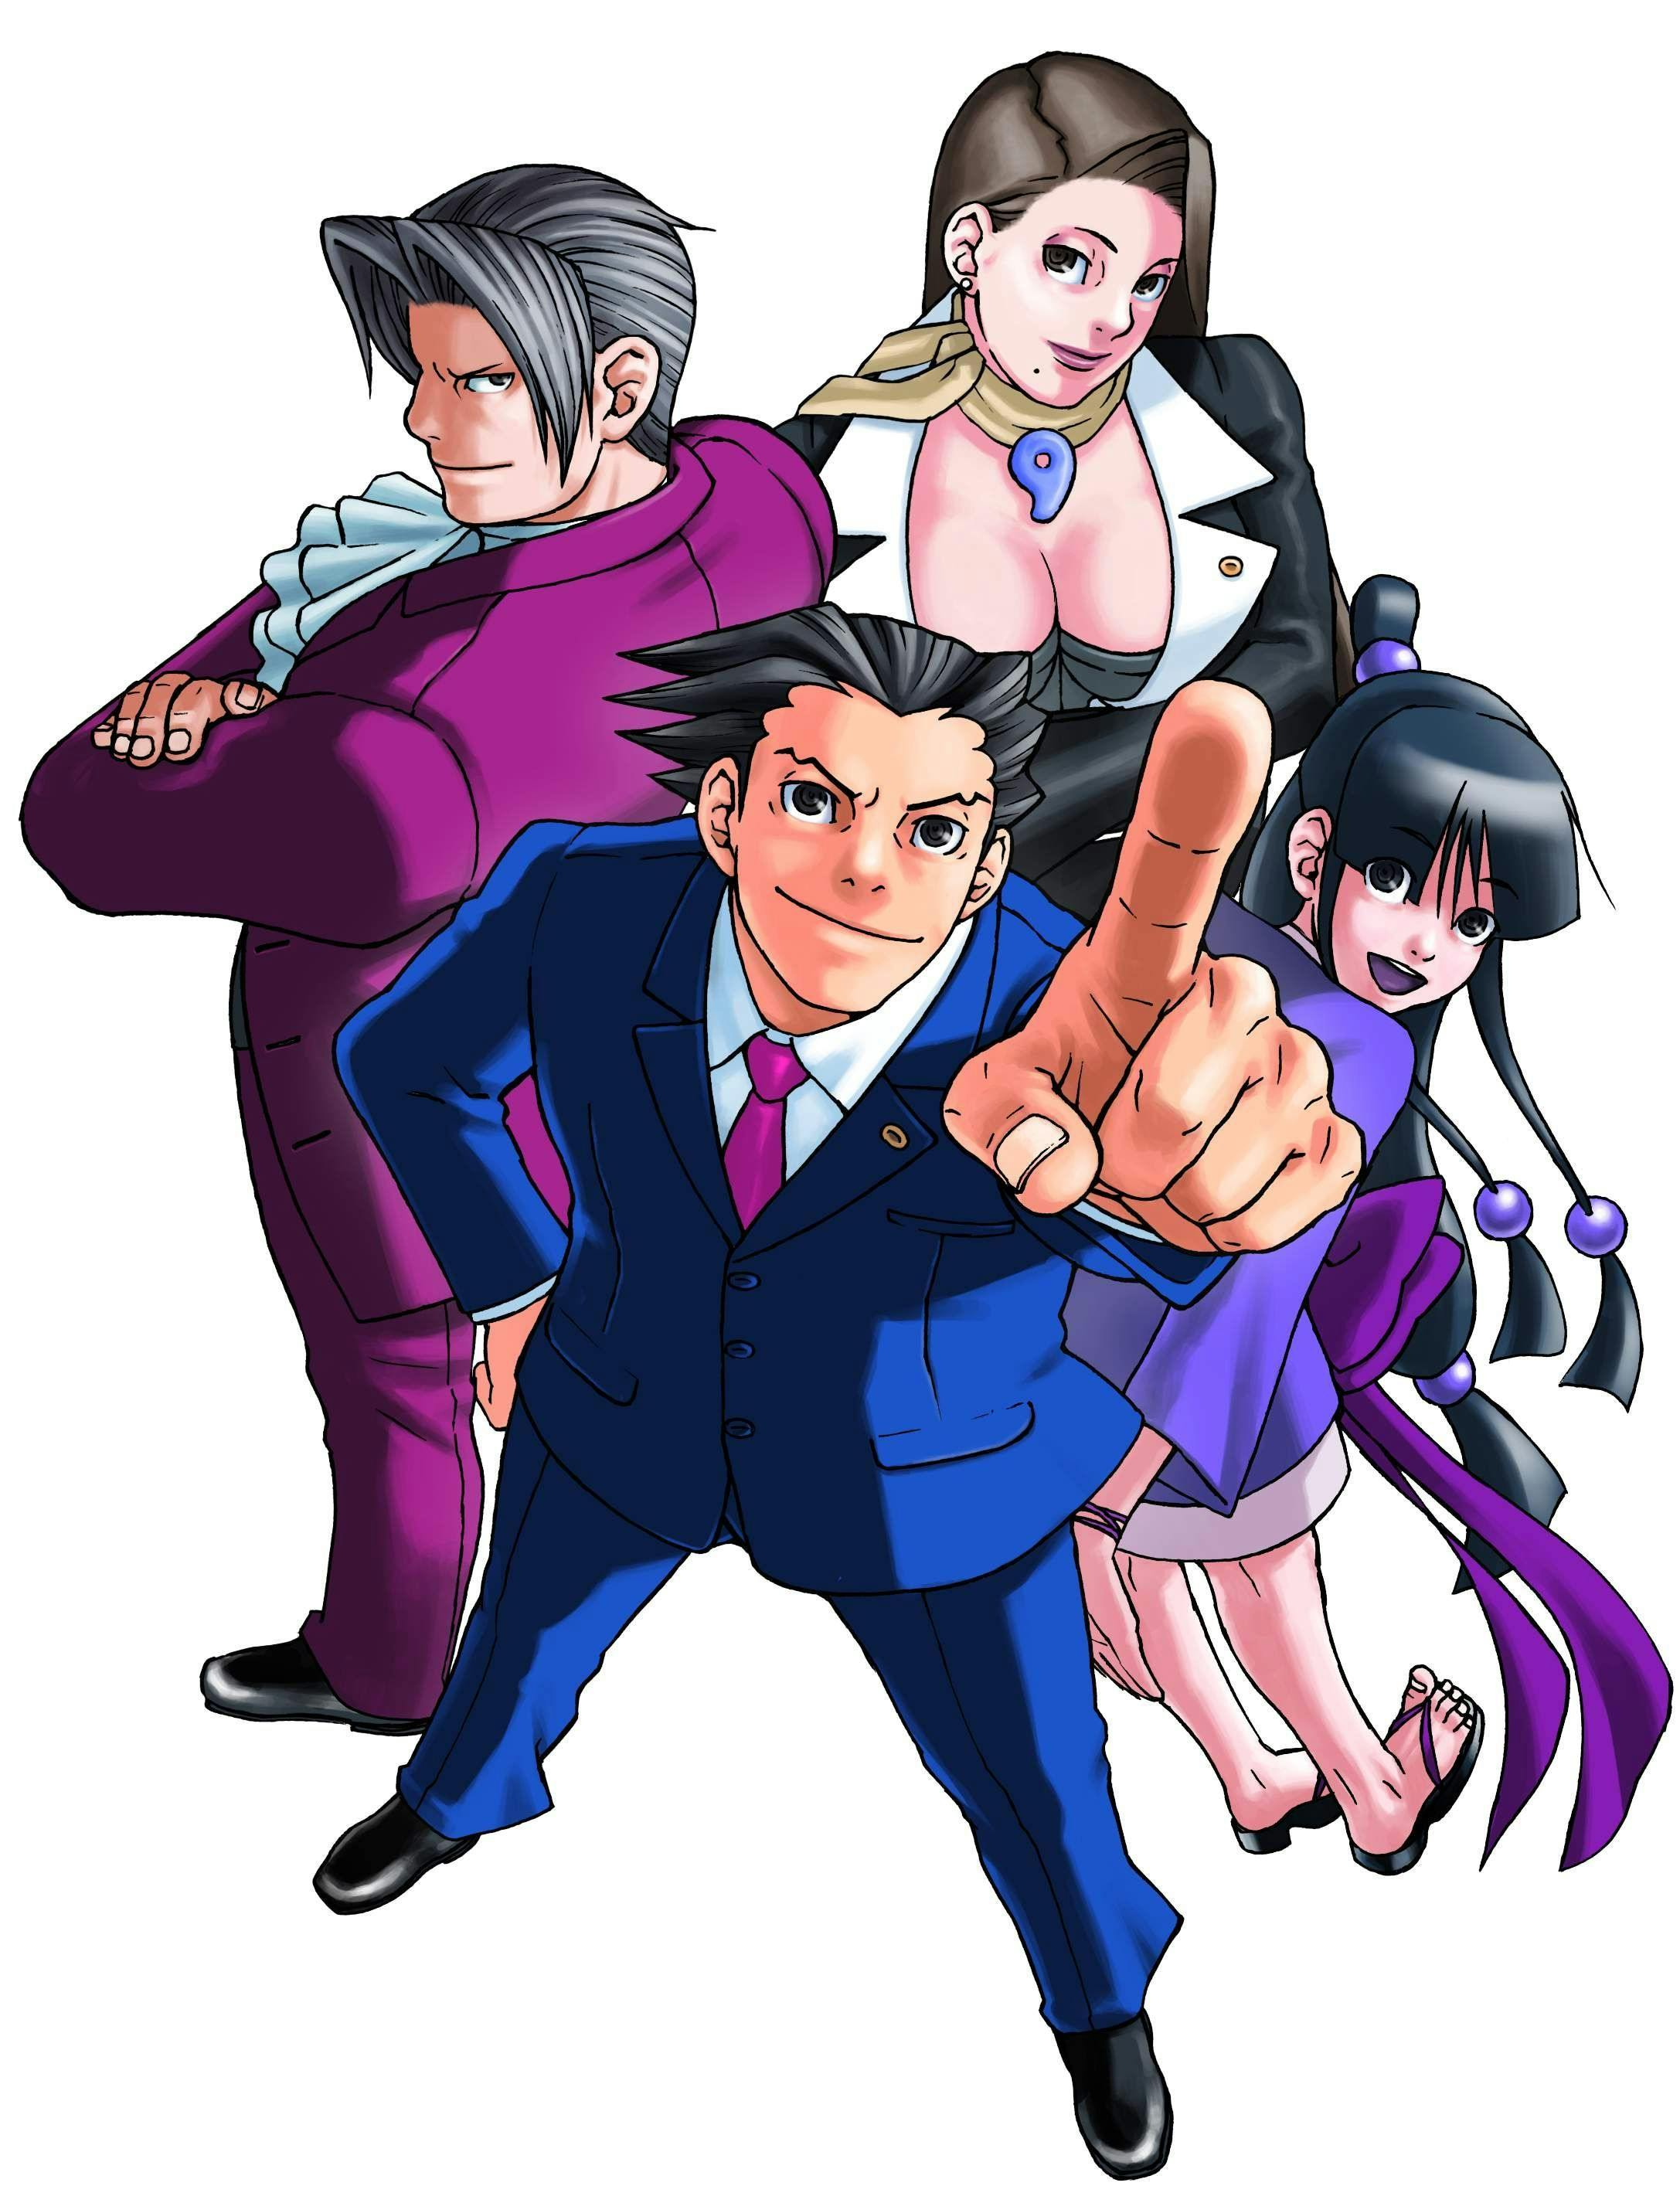 Phoenix Wright: Ace Attorney - Trials and Tribulations, Ace Attorney Wiki